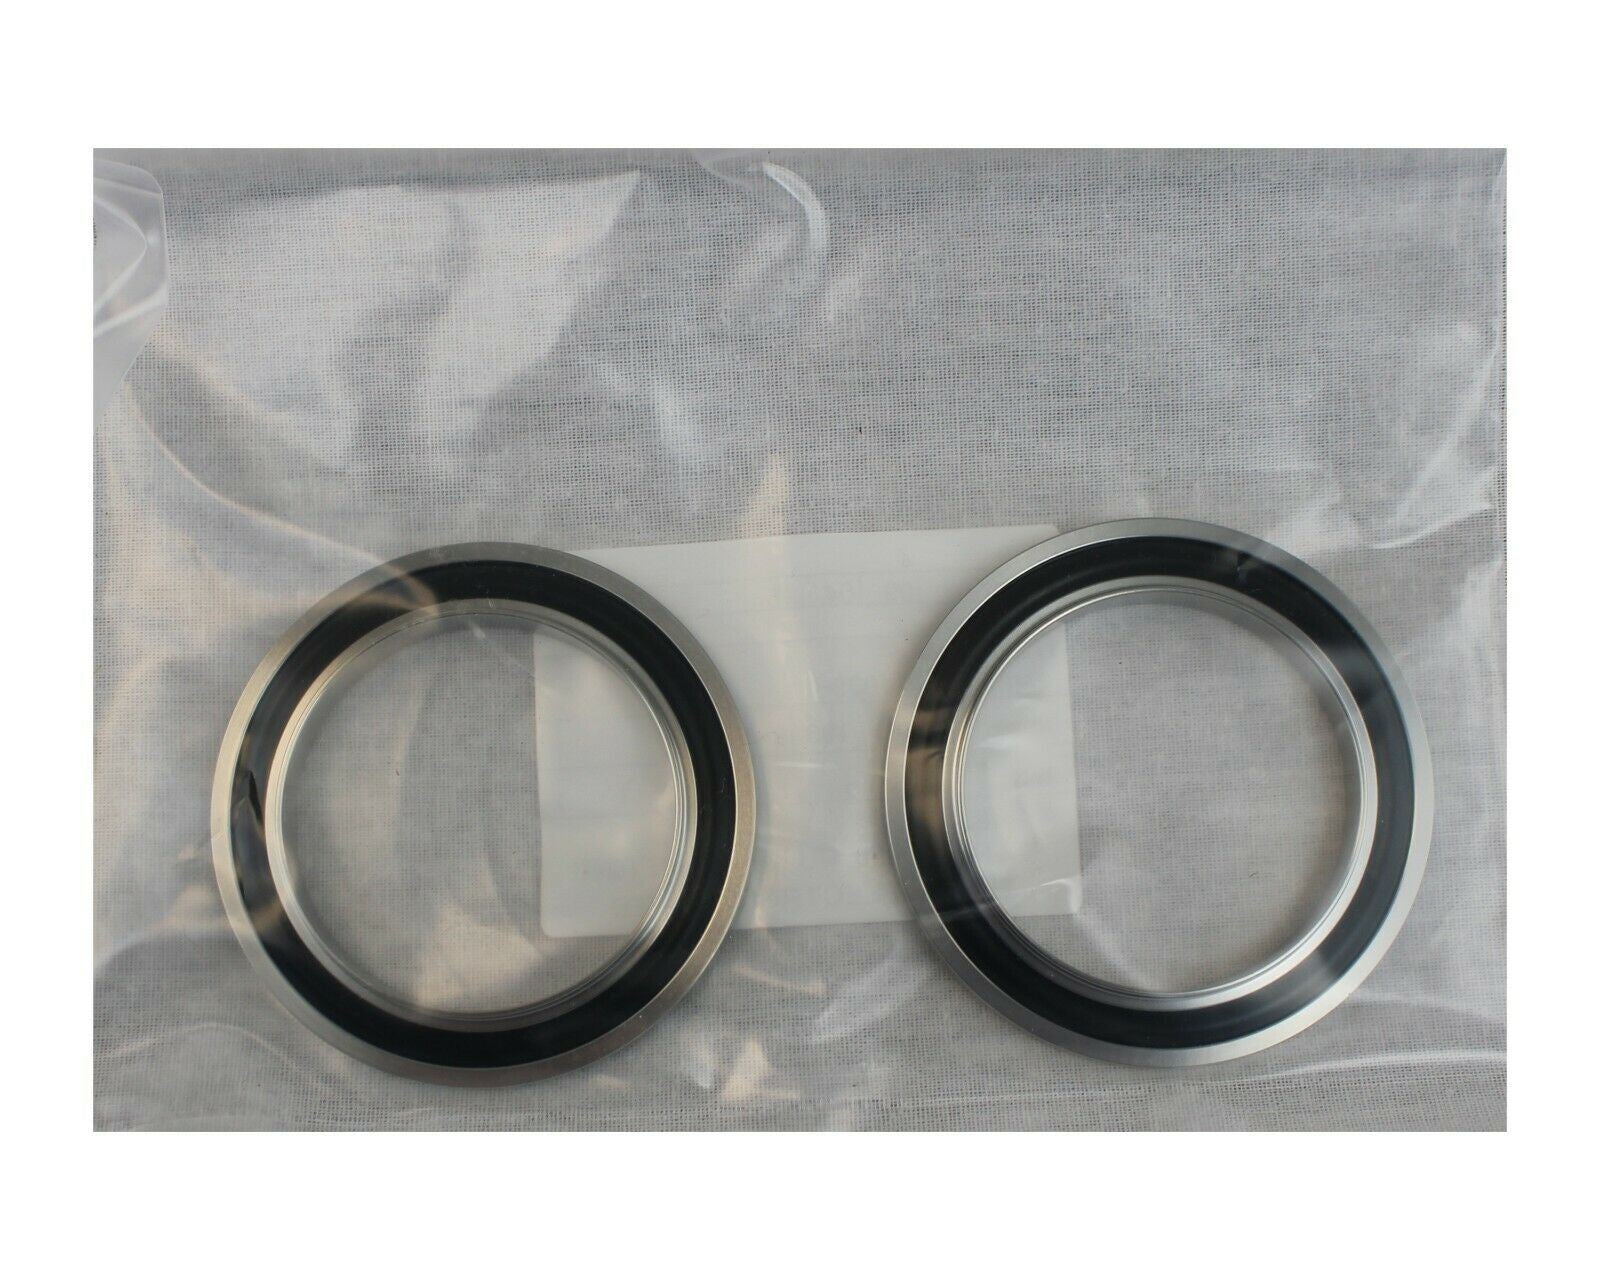 Liner O-Ring, Kalrez, for 6.3 mm and 6.5 mm OD Liners, for Lucidity  miniGCs, 5-pk.